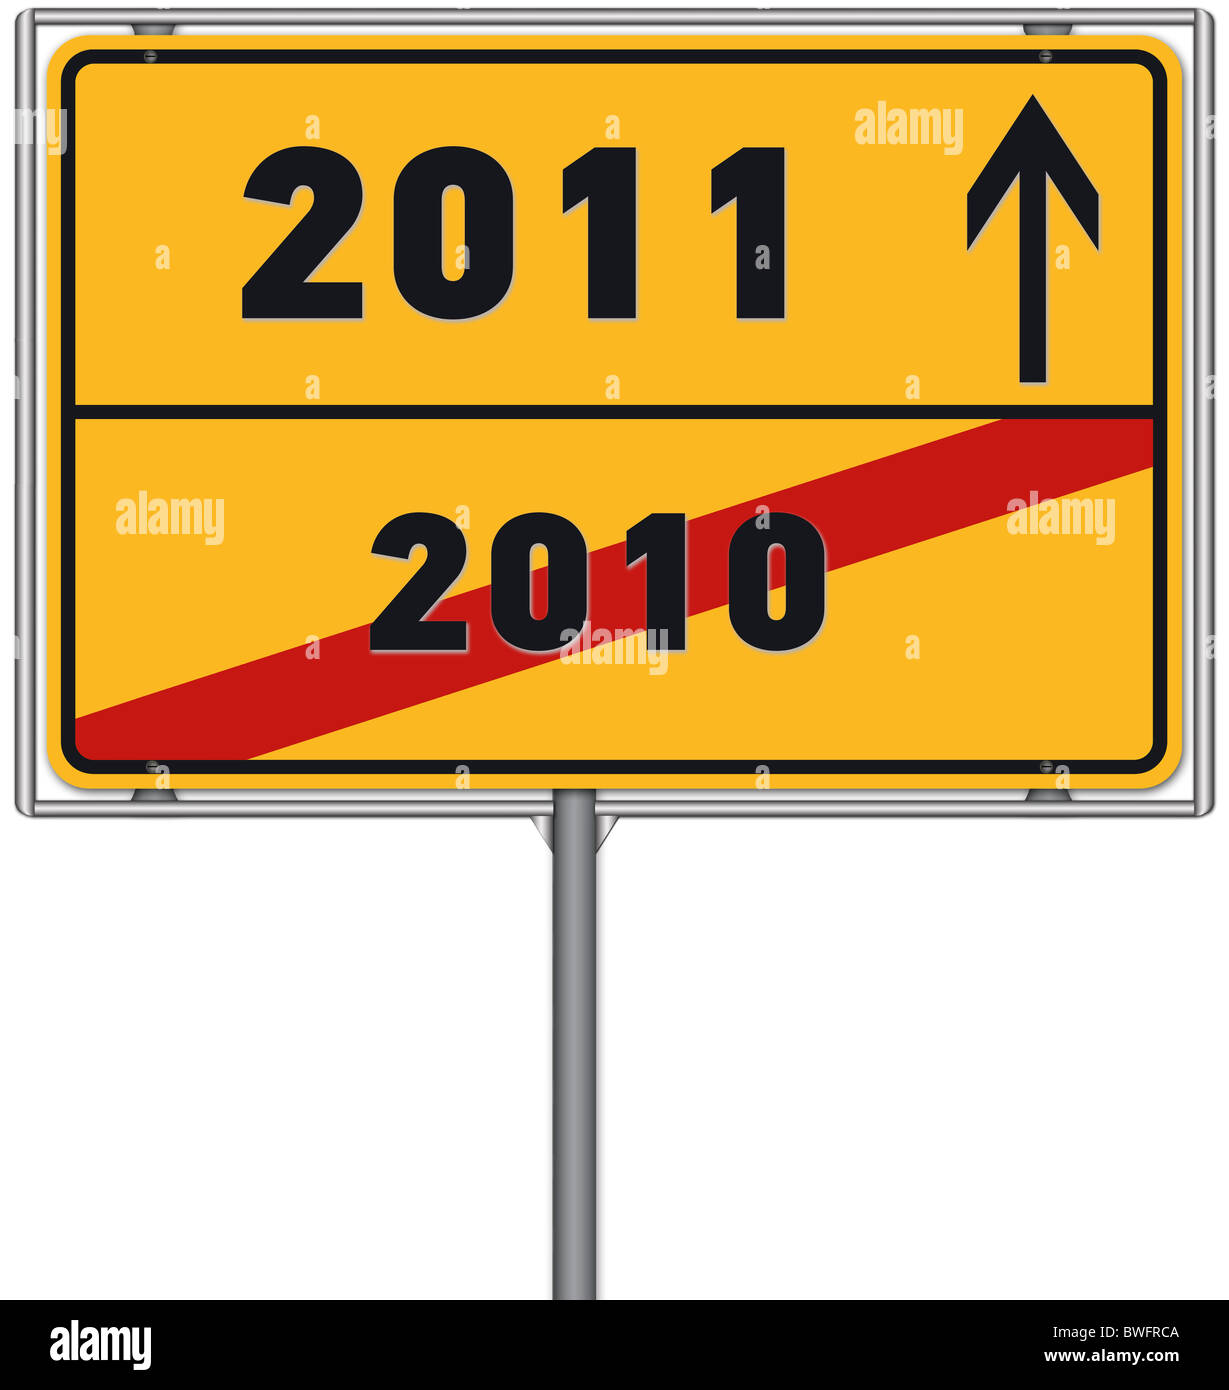 German city limit sign as symbol for the ending of 2010 and the year 2011 being ahead; New Year's Eve, silvester, Stock Photo